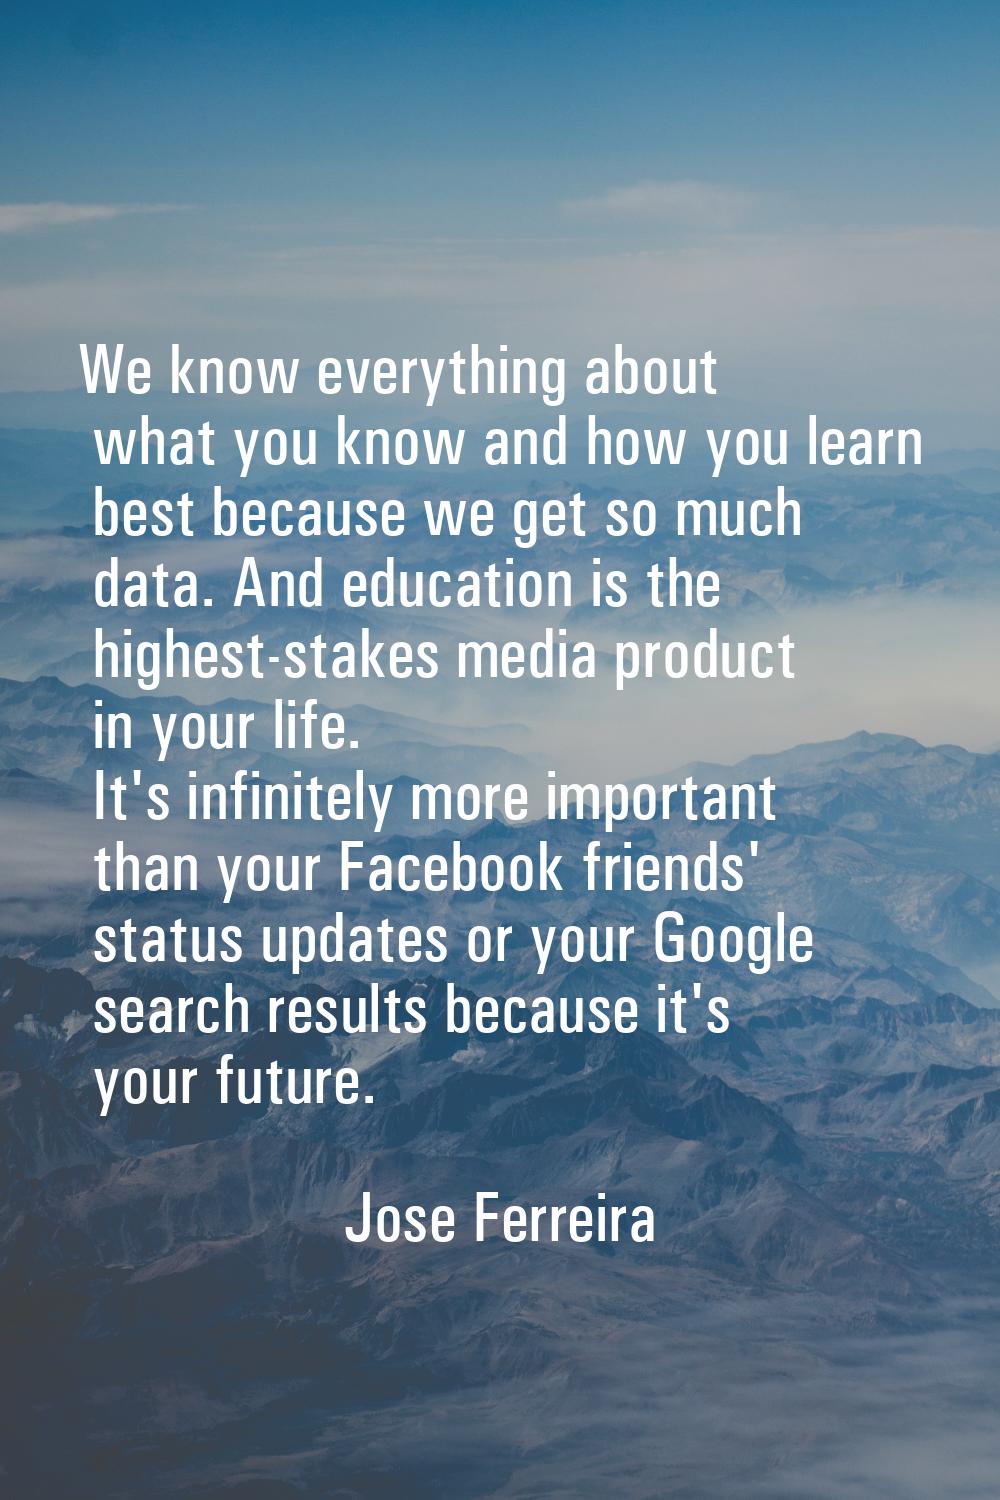 We know everything about what you know and how you learn best because we get so much data. And educ